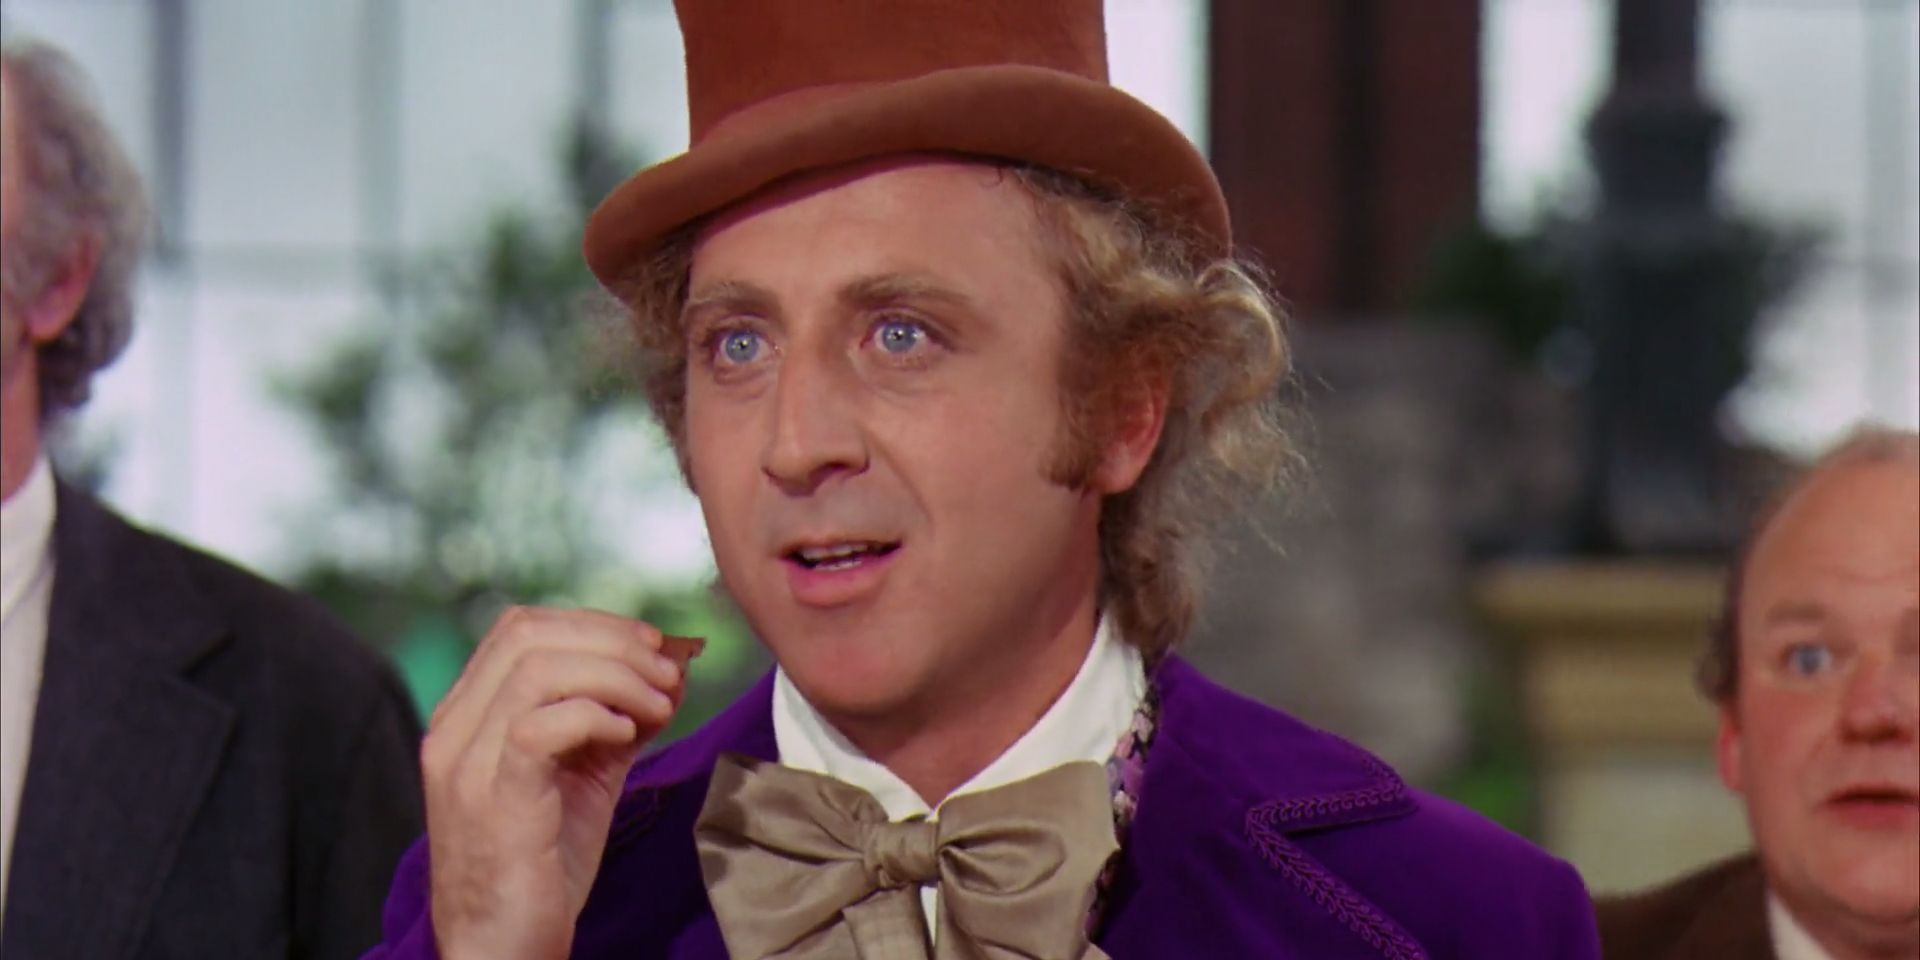 Gene Wilder as Willy Wonka, wearing his signature hat and bowtie, stands in his chocolate factory